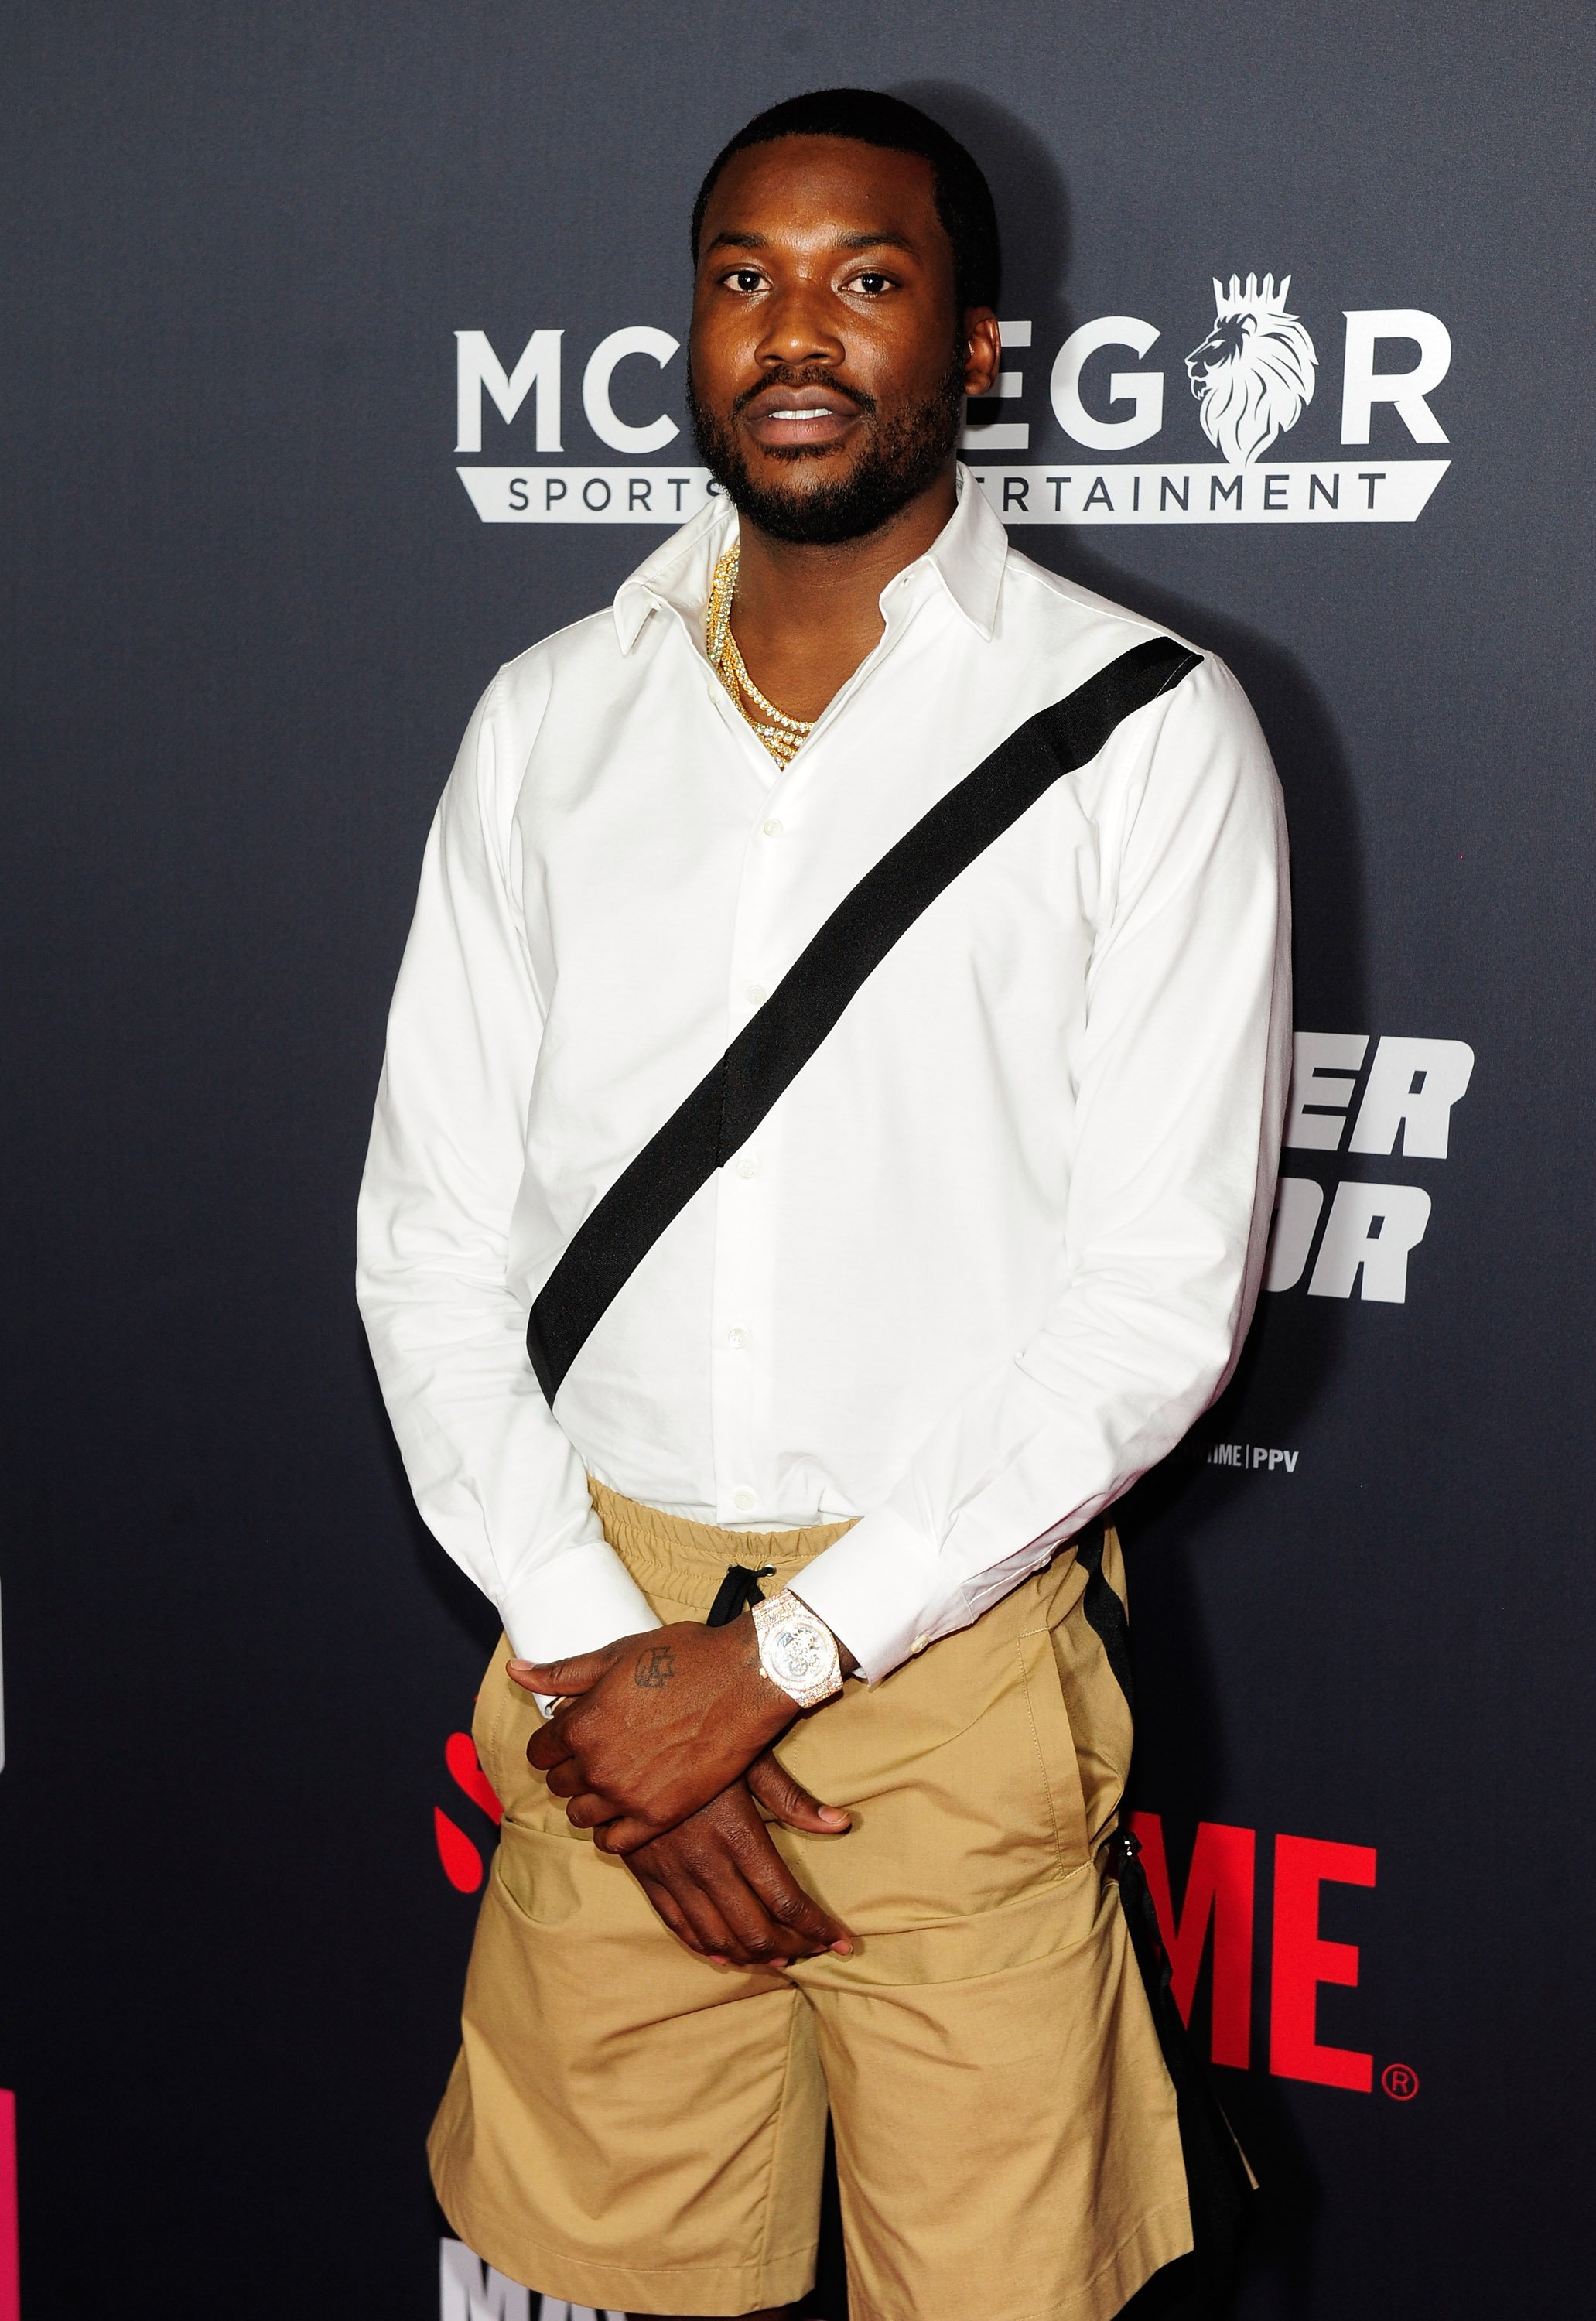 Meek Mill attending a VIP party before the Floyd Mayweather Jr.-Conor McGregor boxing match in Las Vegas in August 2017. | Photo: Getty Images